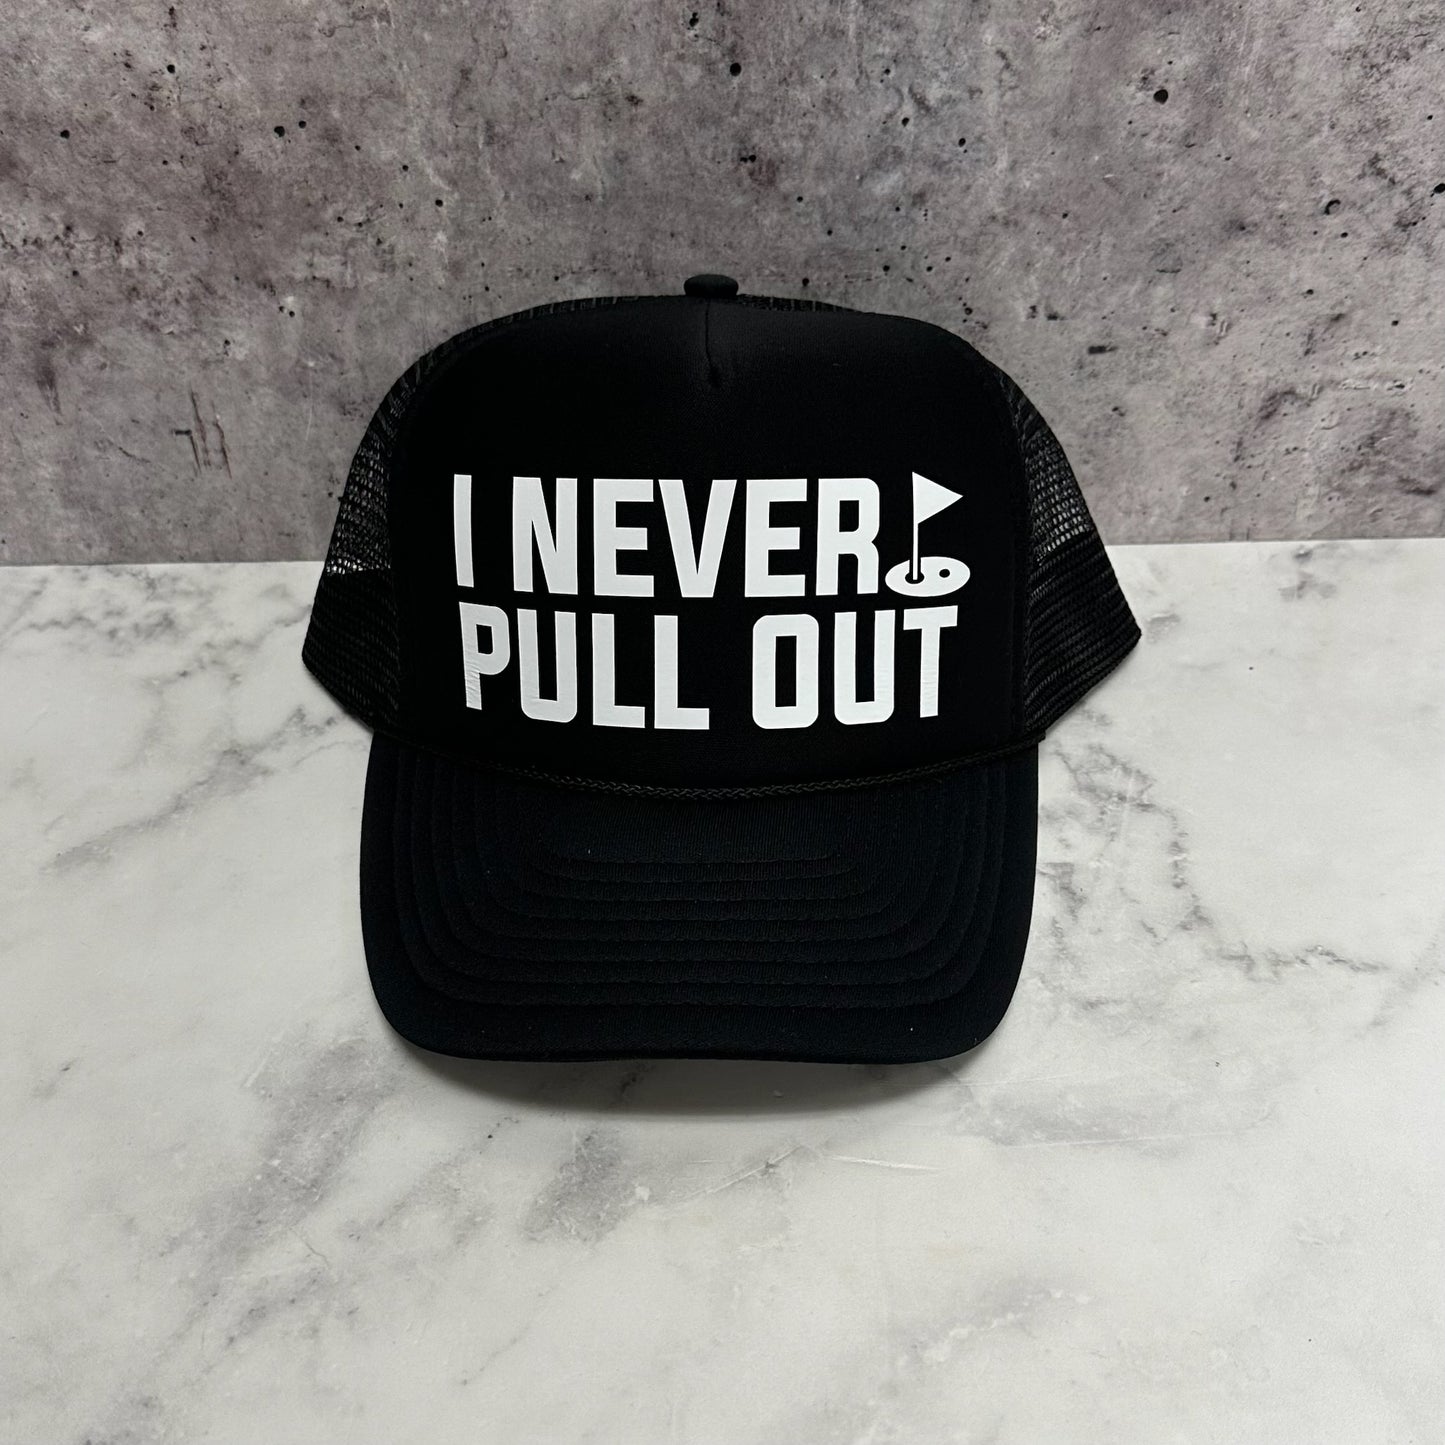 I Never Pull Out Golf Trucker Hat